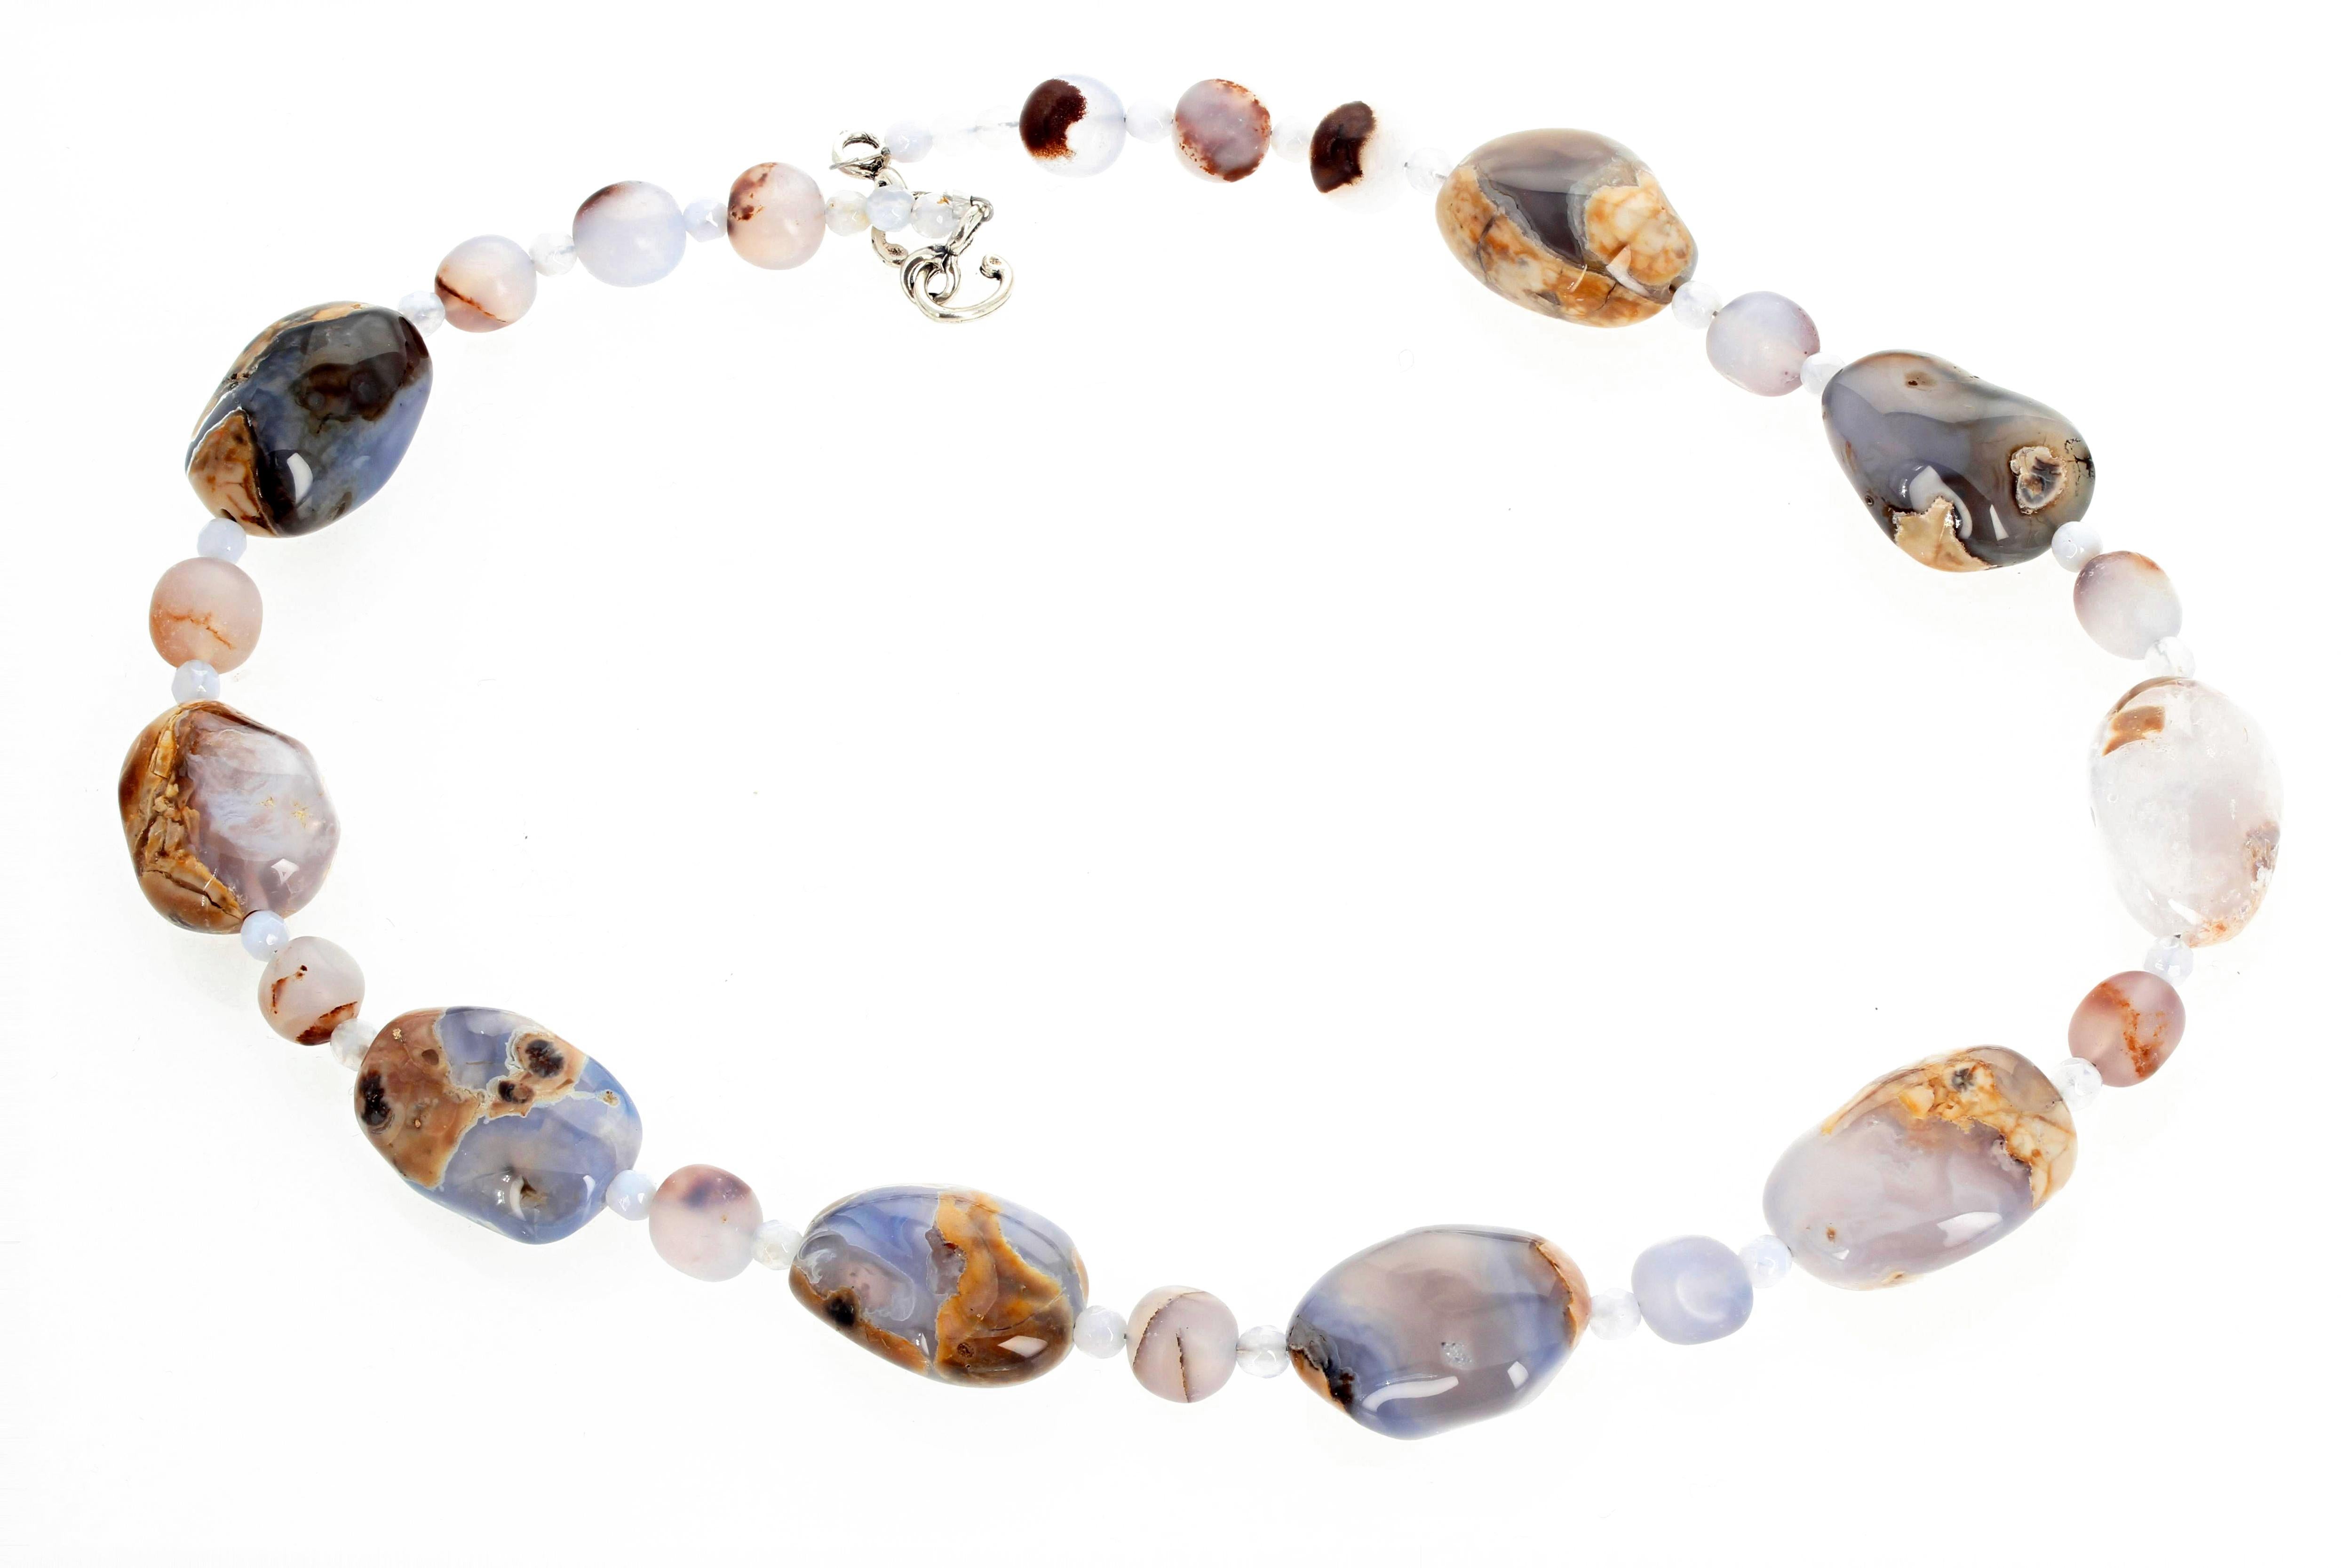 Chalcedony, Chalcedony and Chalcedony Necklace 1